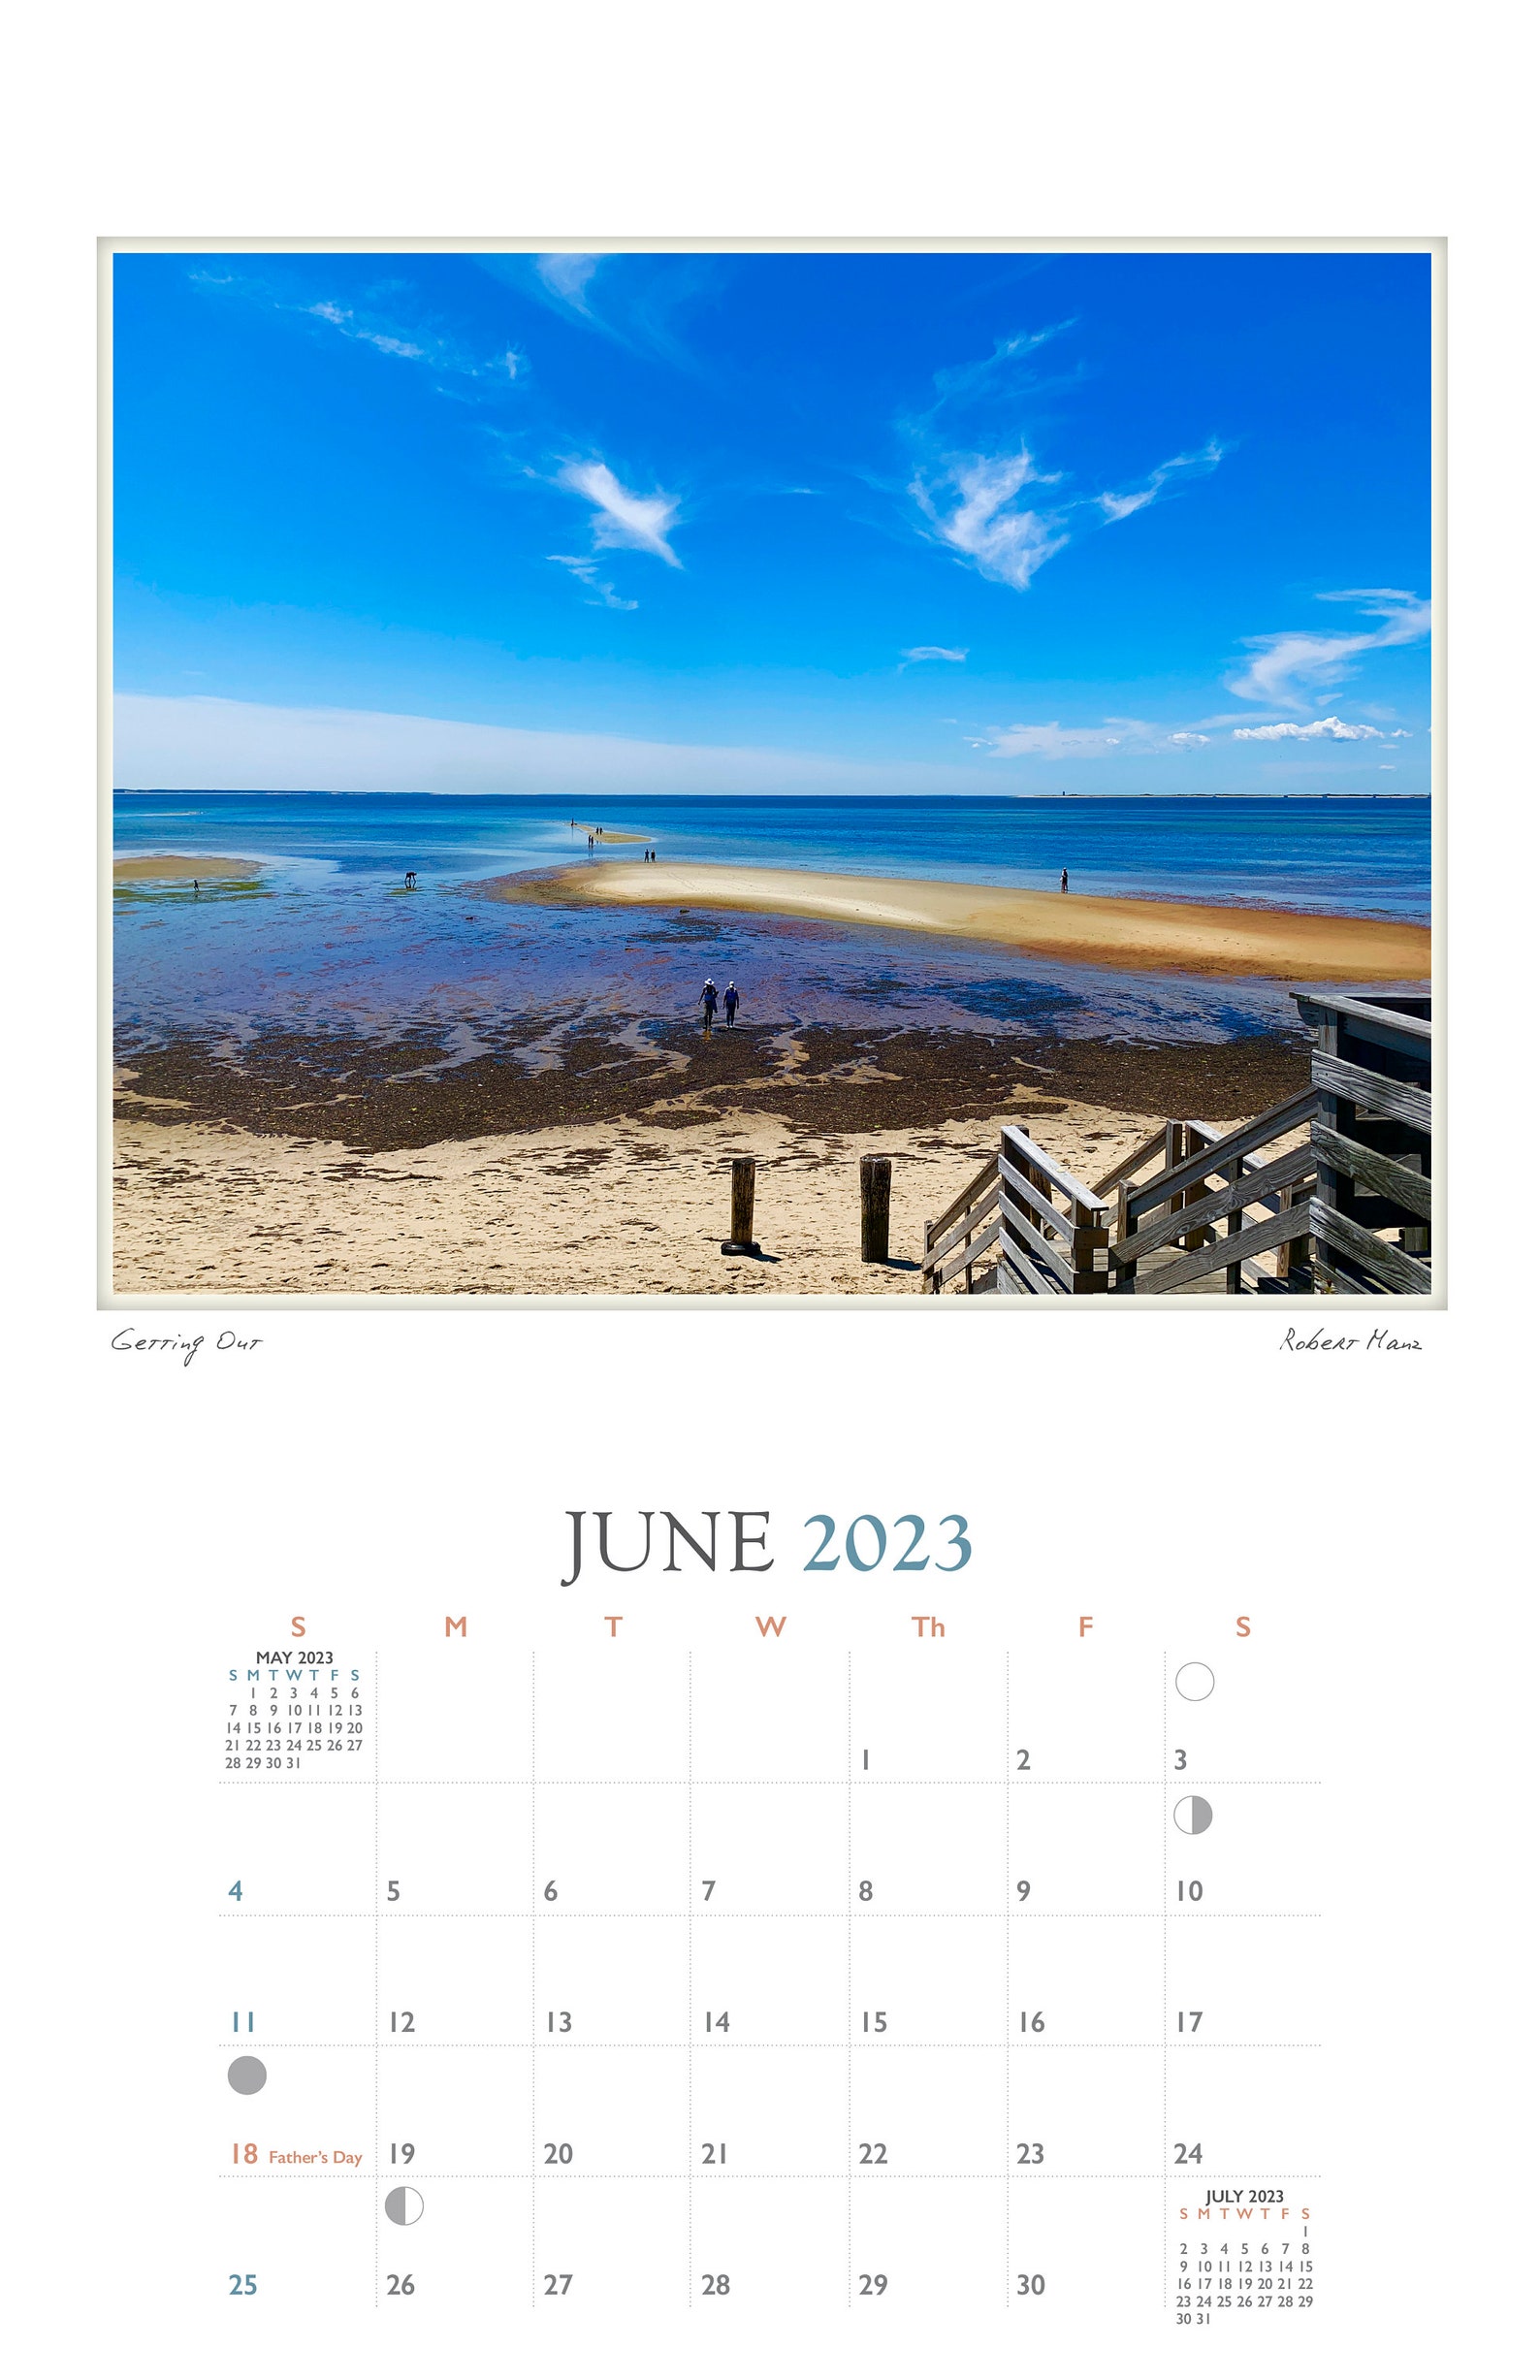 Provincetown on Cape Cod 2023 Calendar of Scenes From Etsy